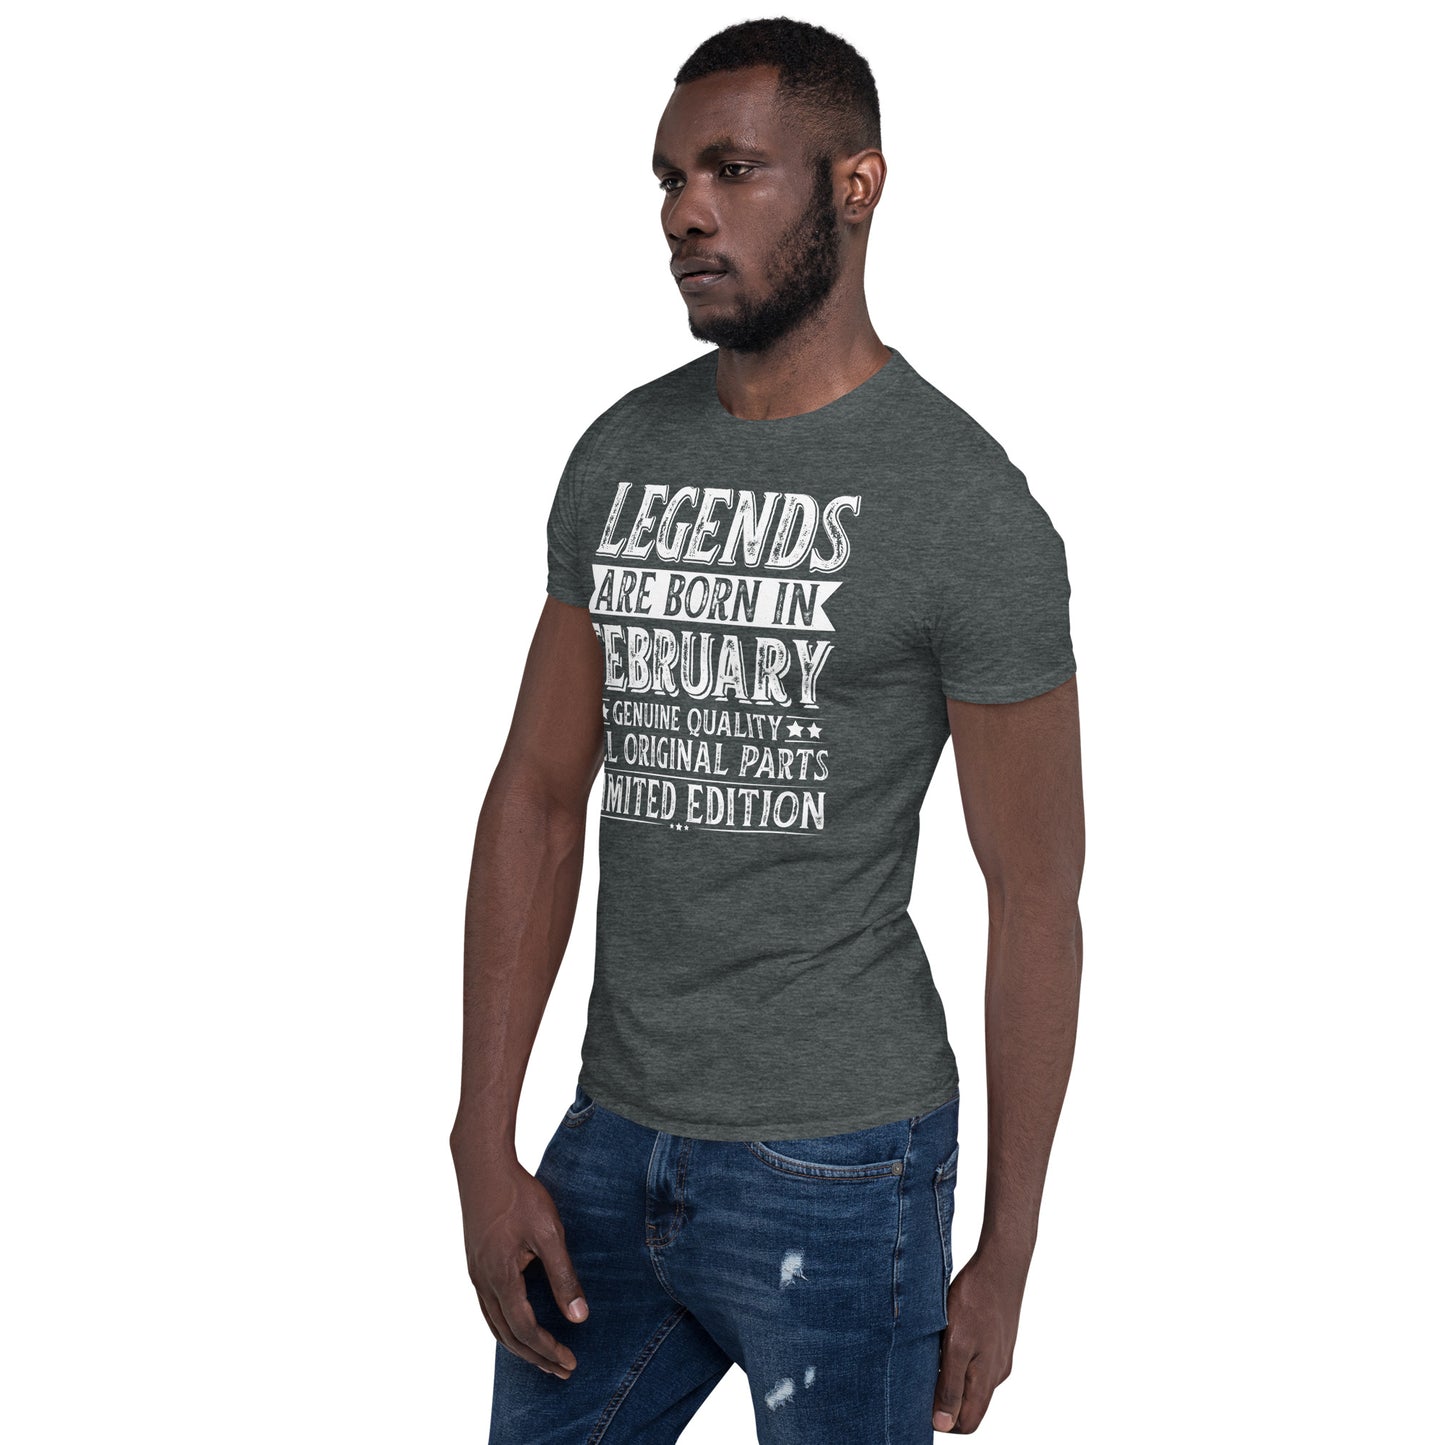 Legends Are Born in February Short-Sleeve Unisex T-Shirt